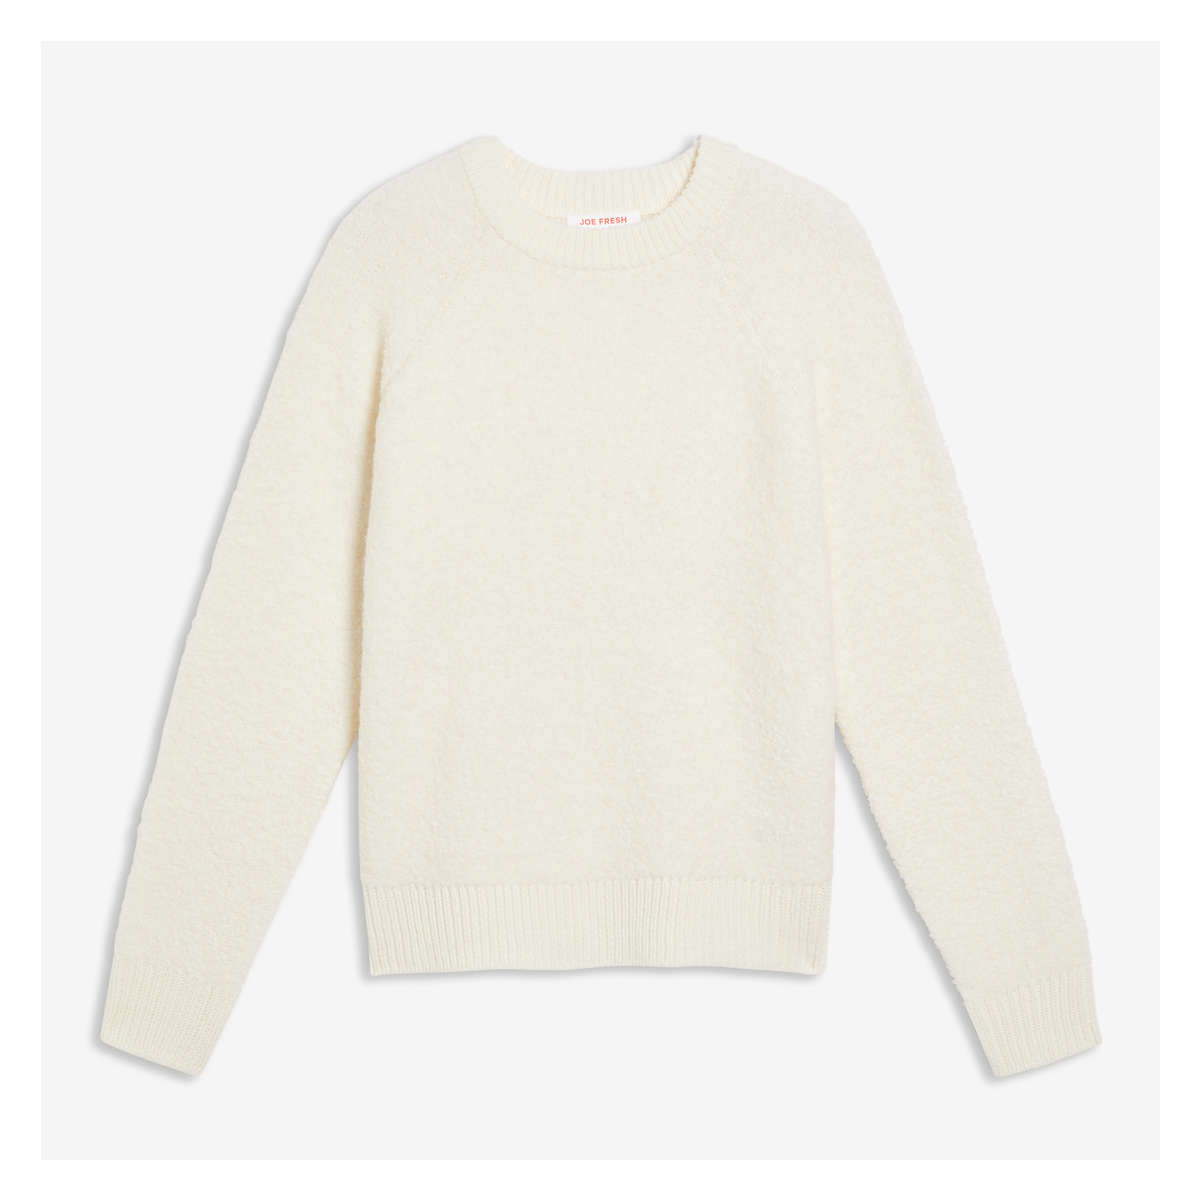 Crew Neck Pullover in Off White from Joe Fresh